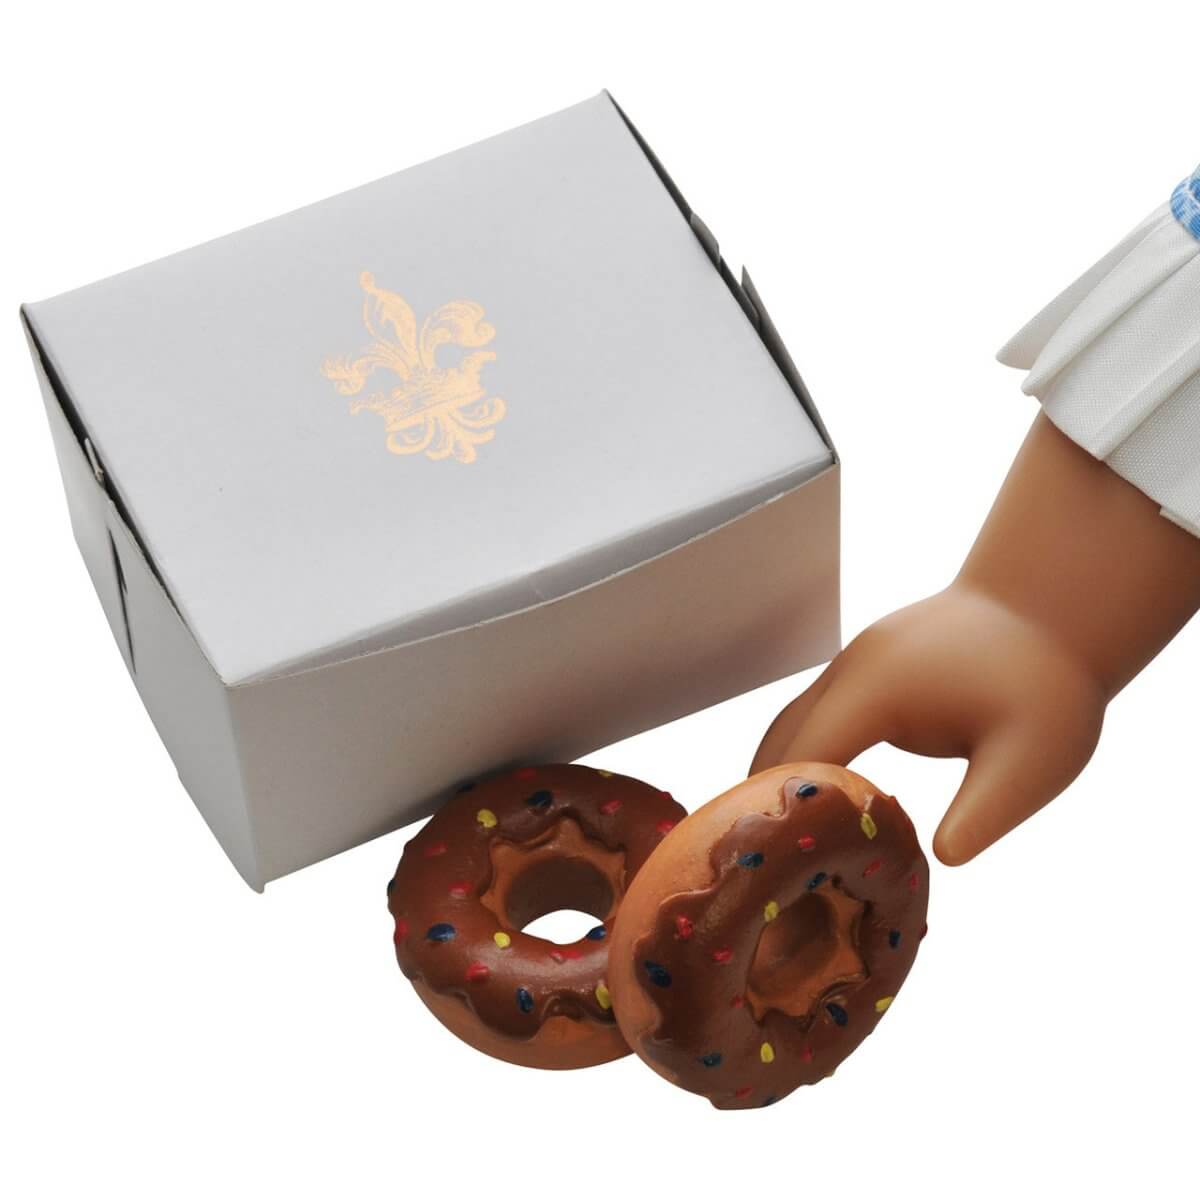 2 Chocolate Frosted Doughnuts with Bakery Box, Accessories for 18 Inch Dolls - Simon's Collectibles